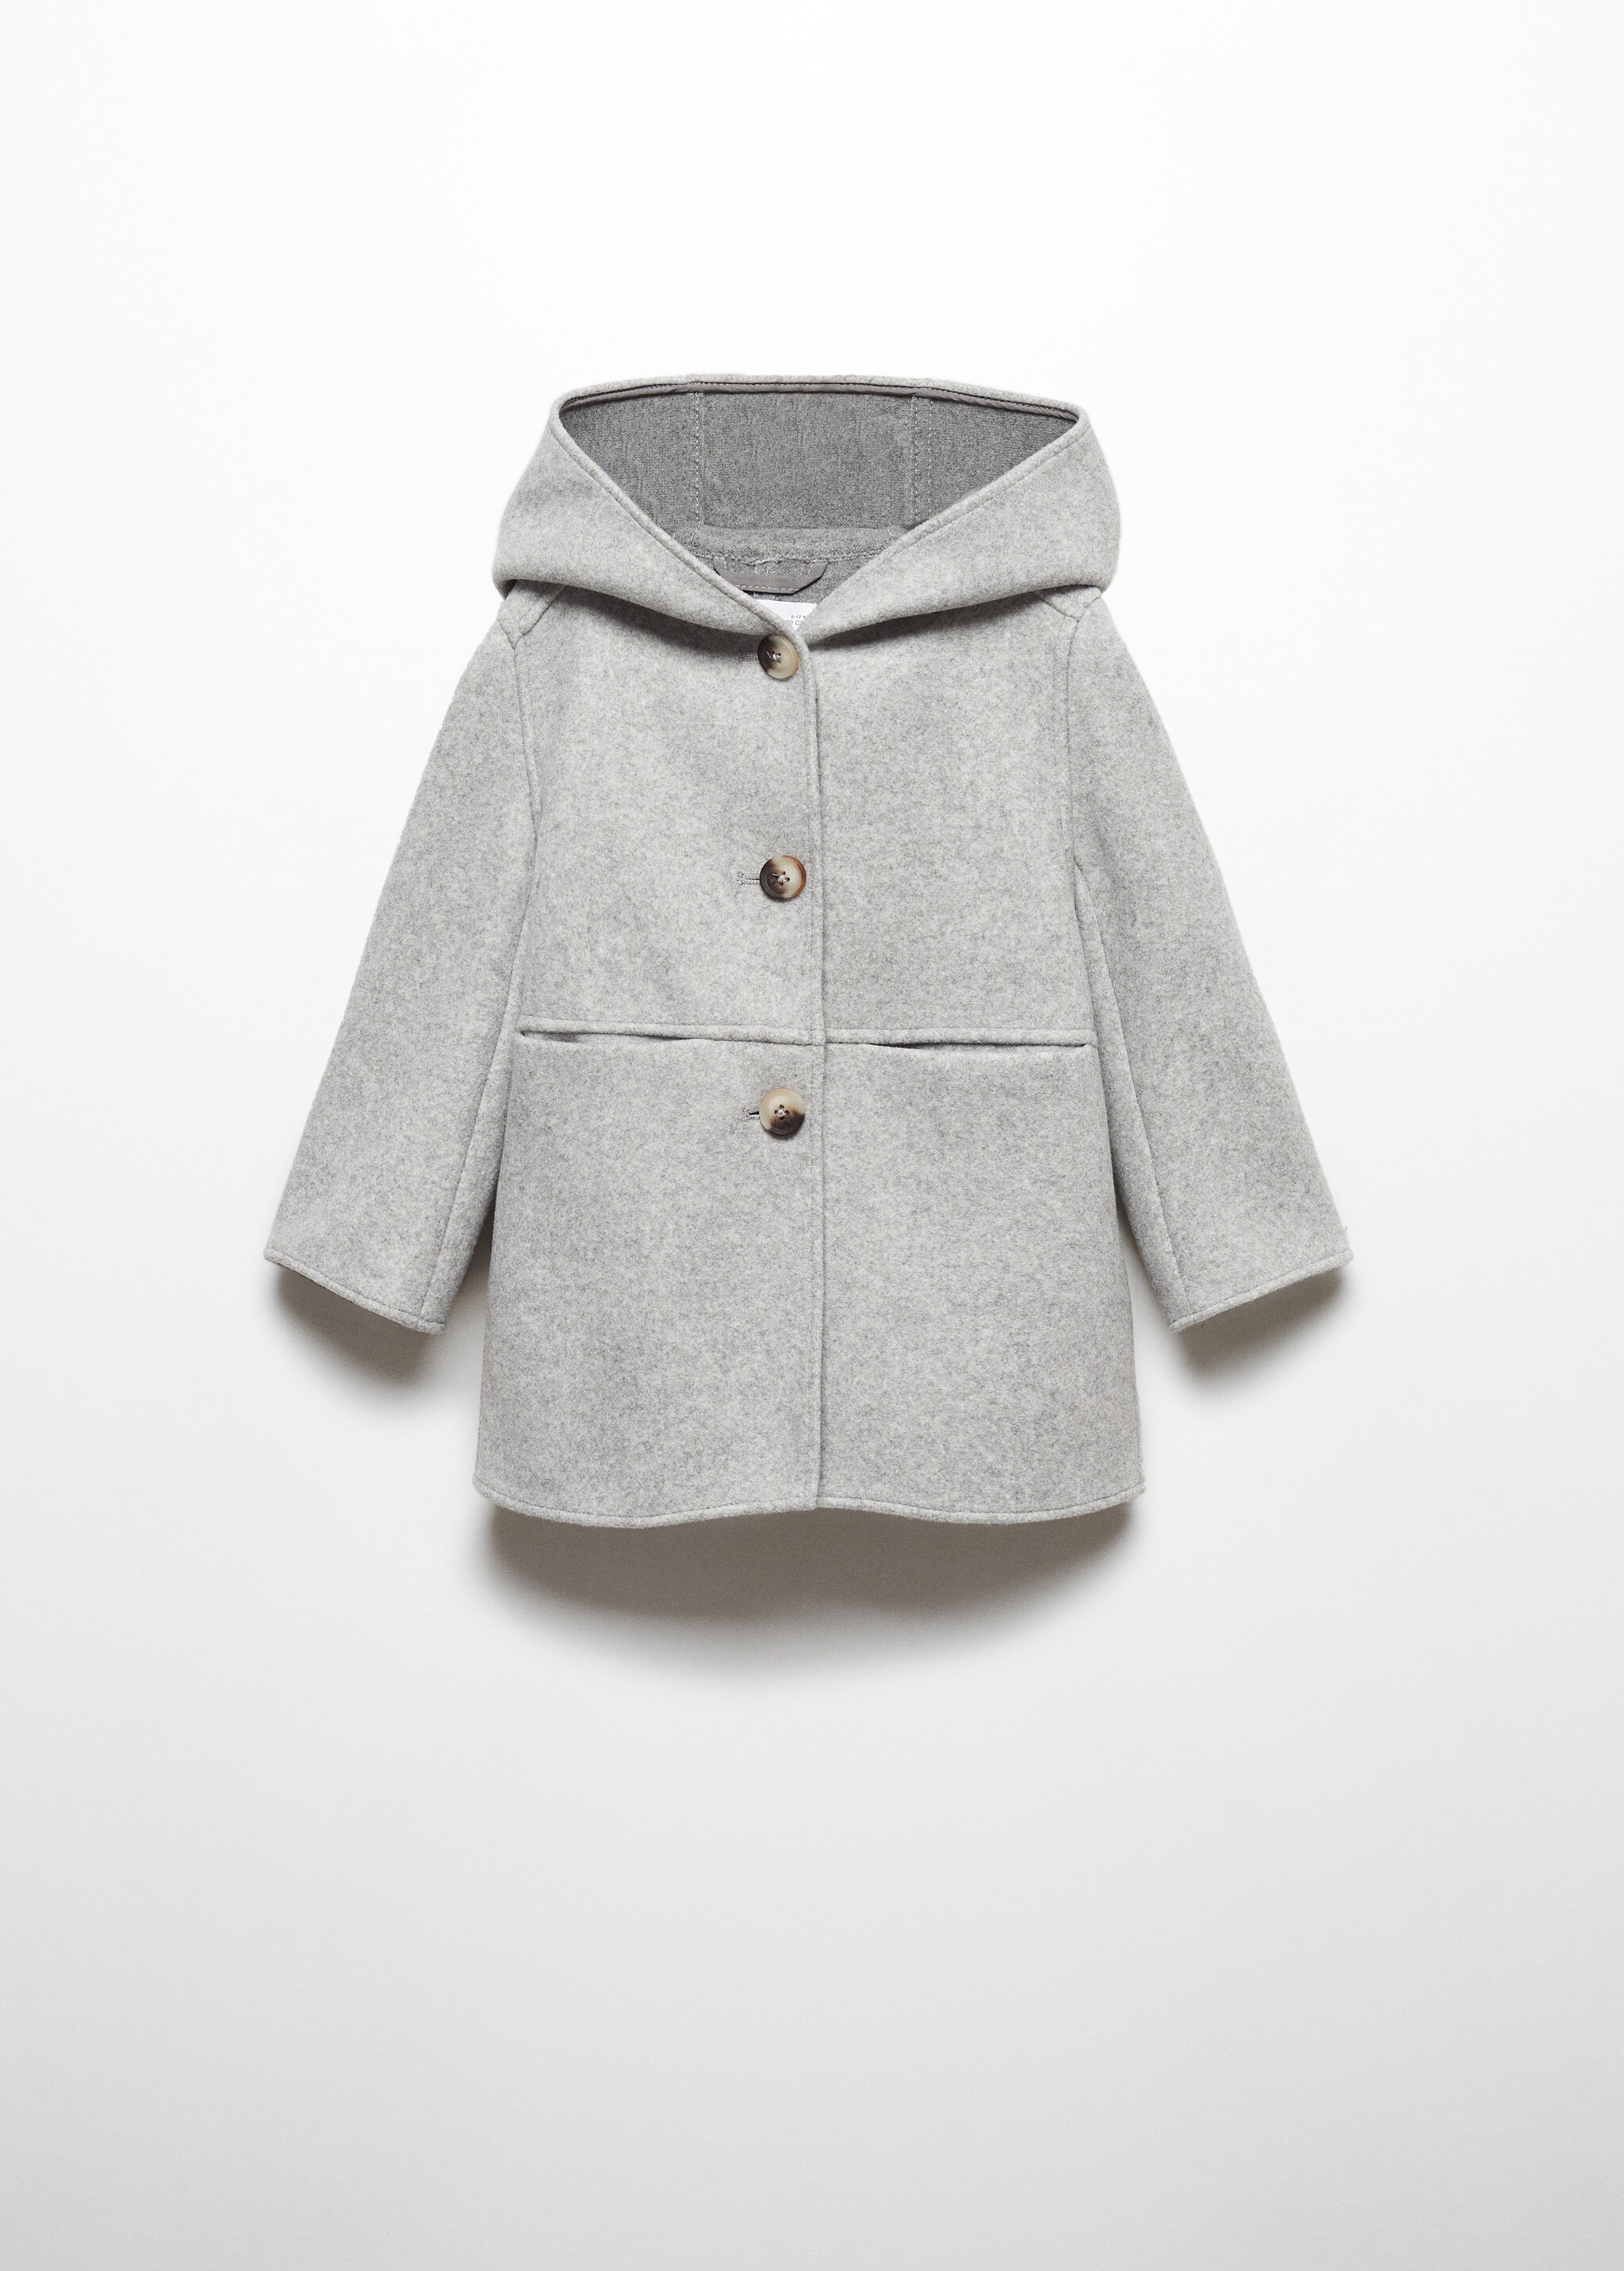 Hooded button coat - Article without model